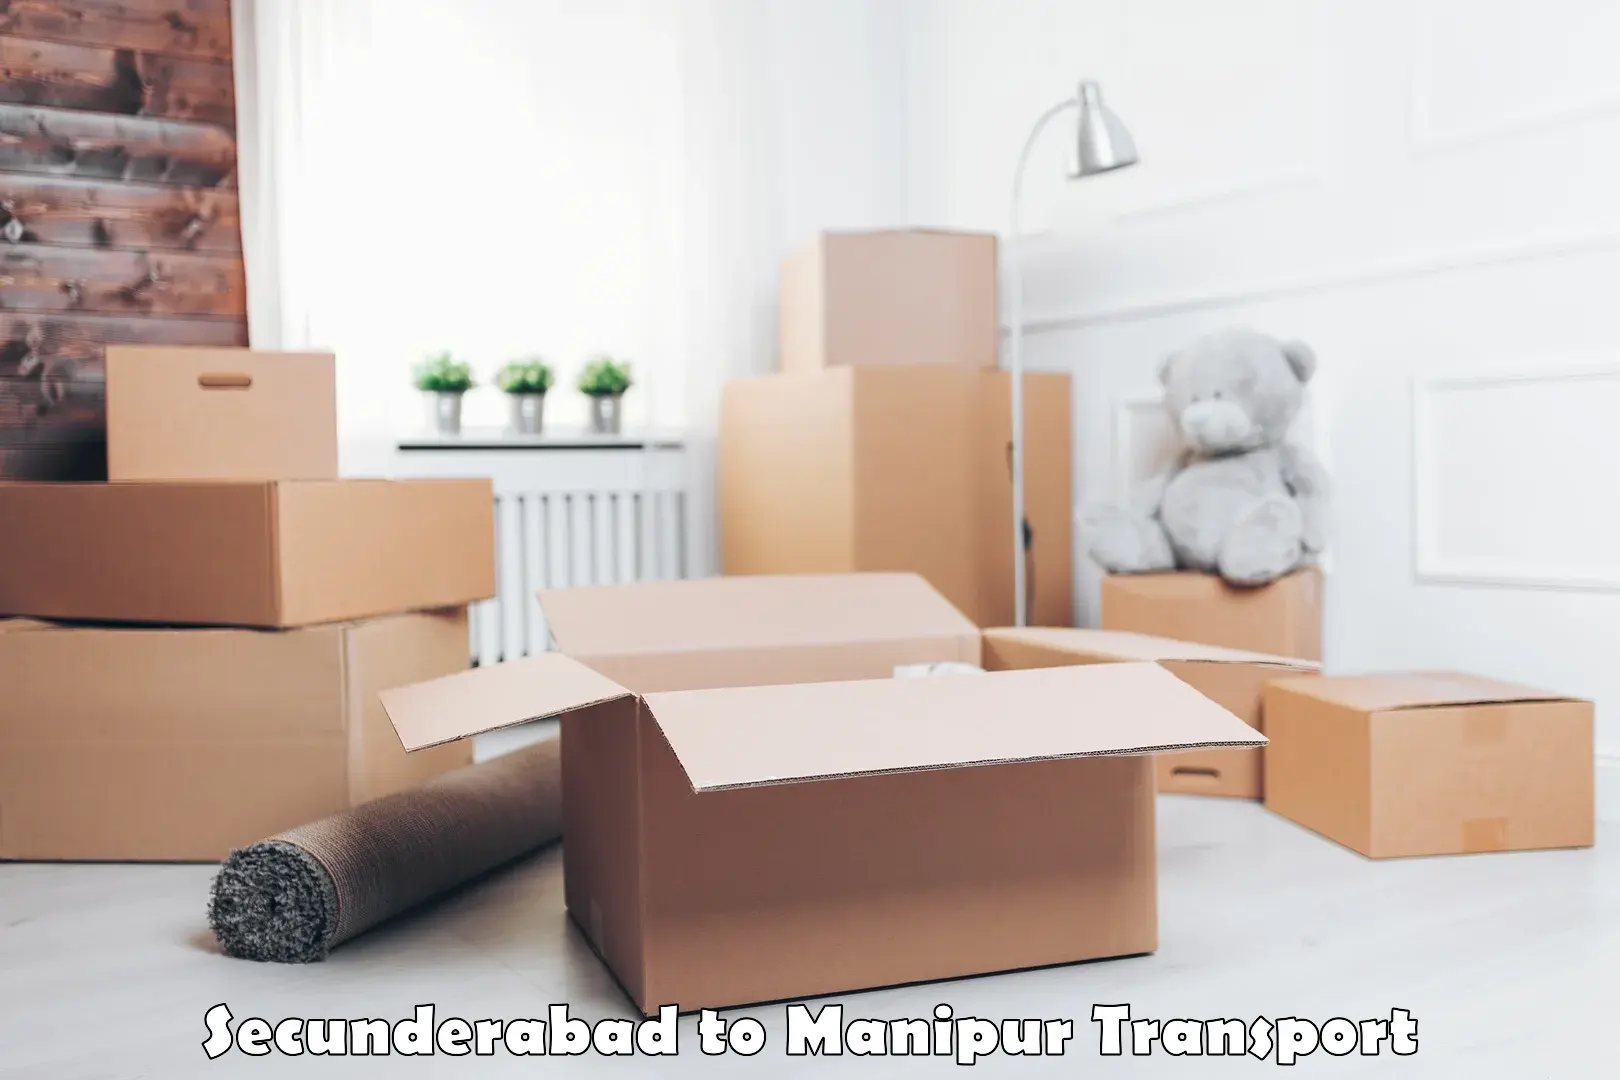 Vehicle parcel service Secunderabad to Manipur